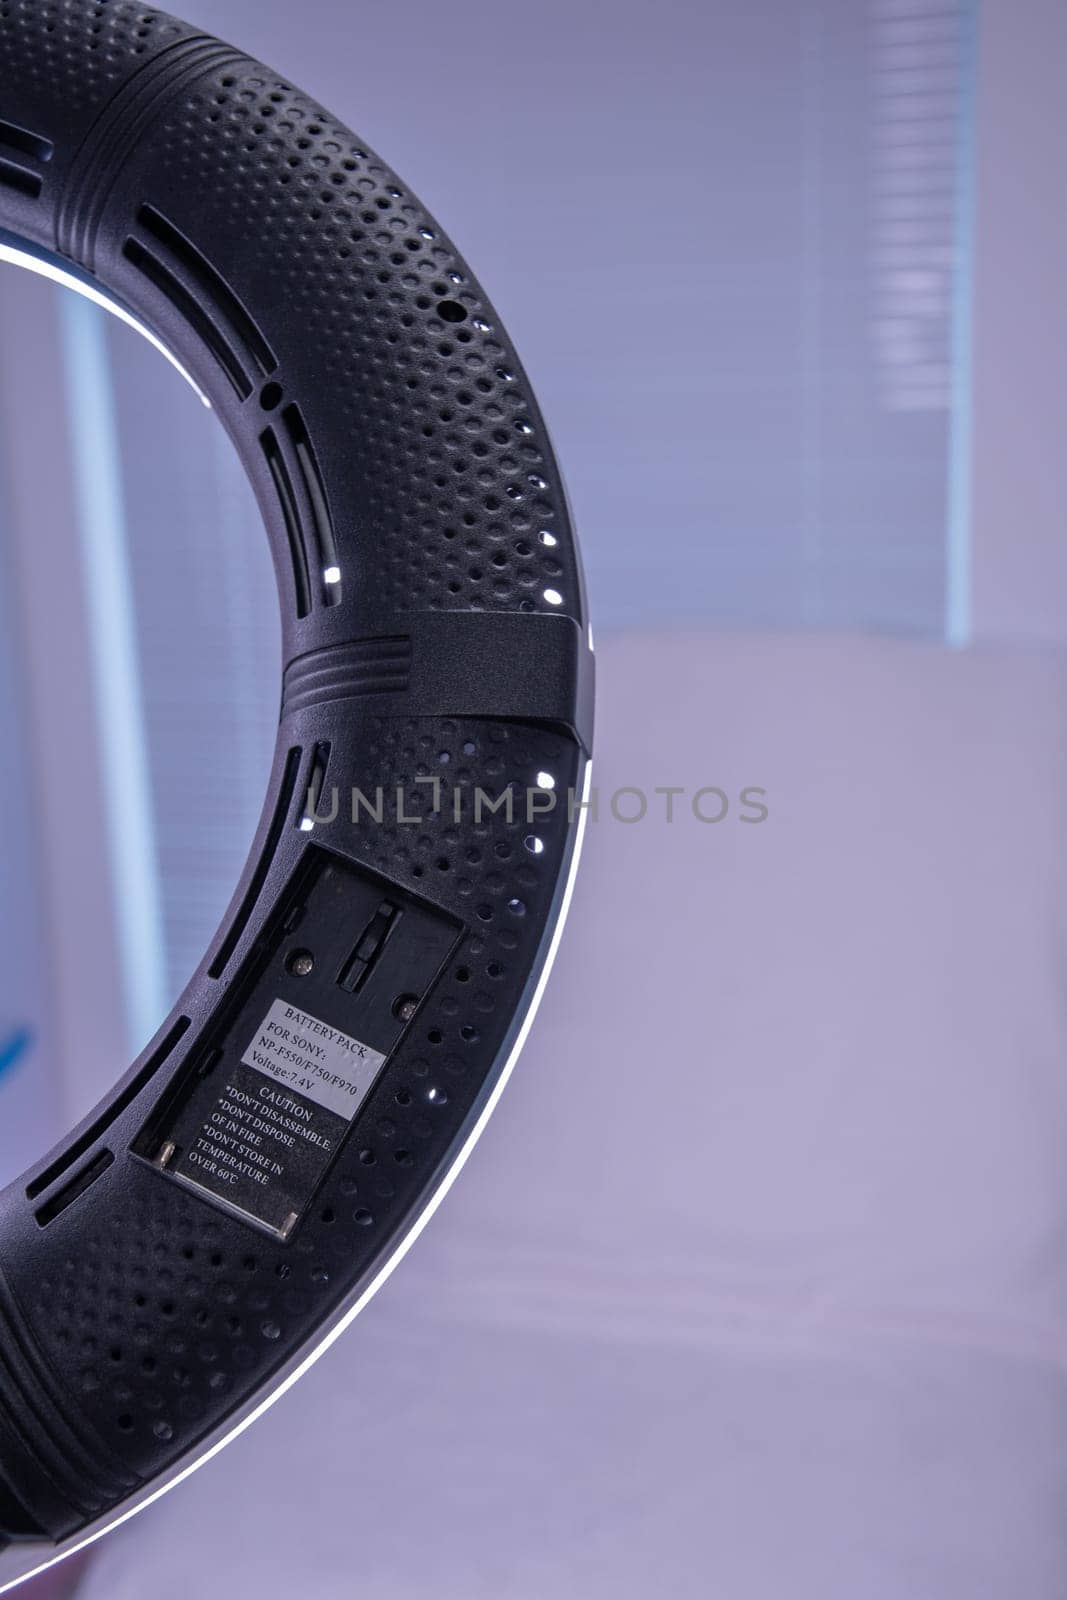 circular neon LED lamp in a beauty salon, Popular modern light for make-up and beauty care. High quality photo